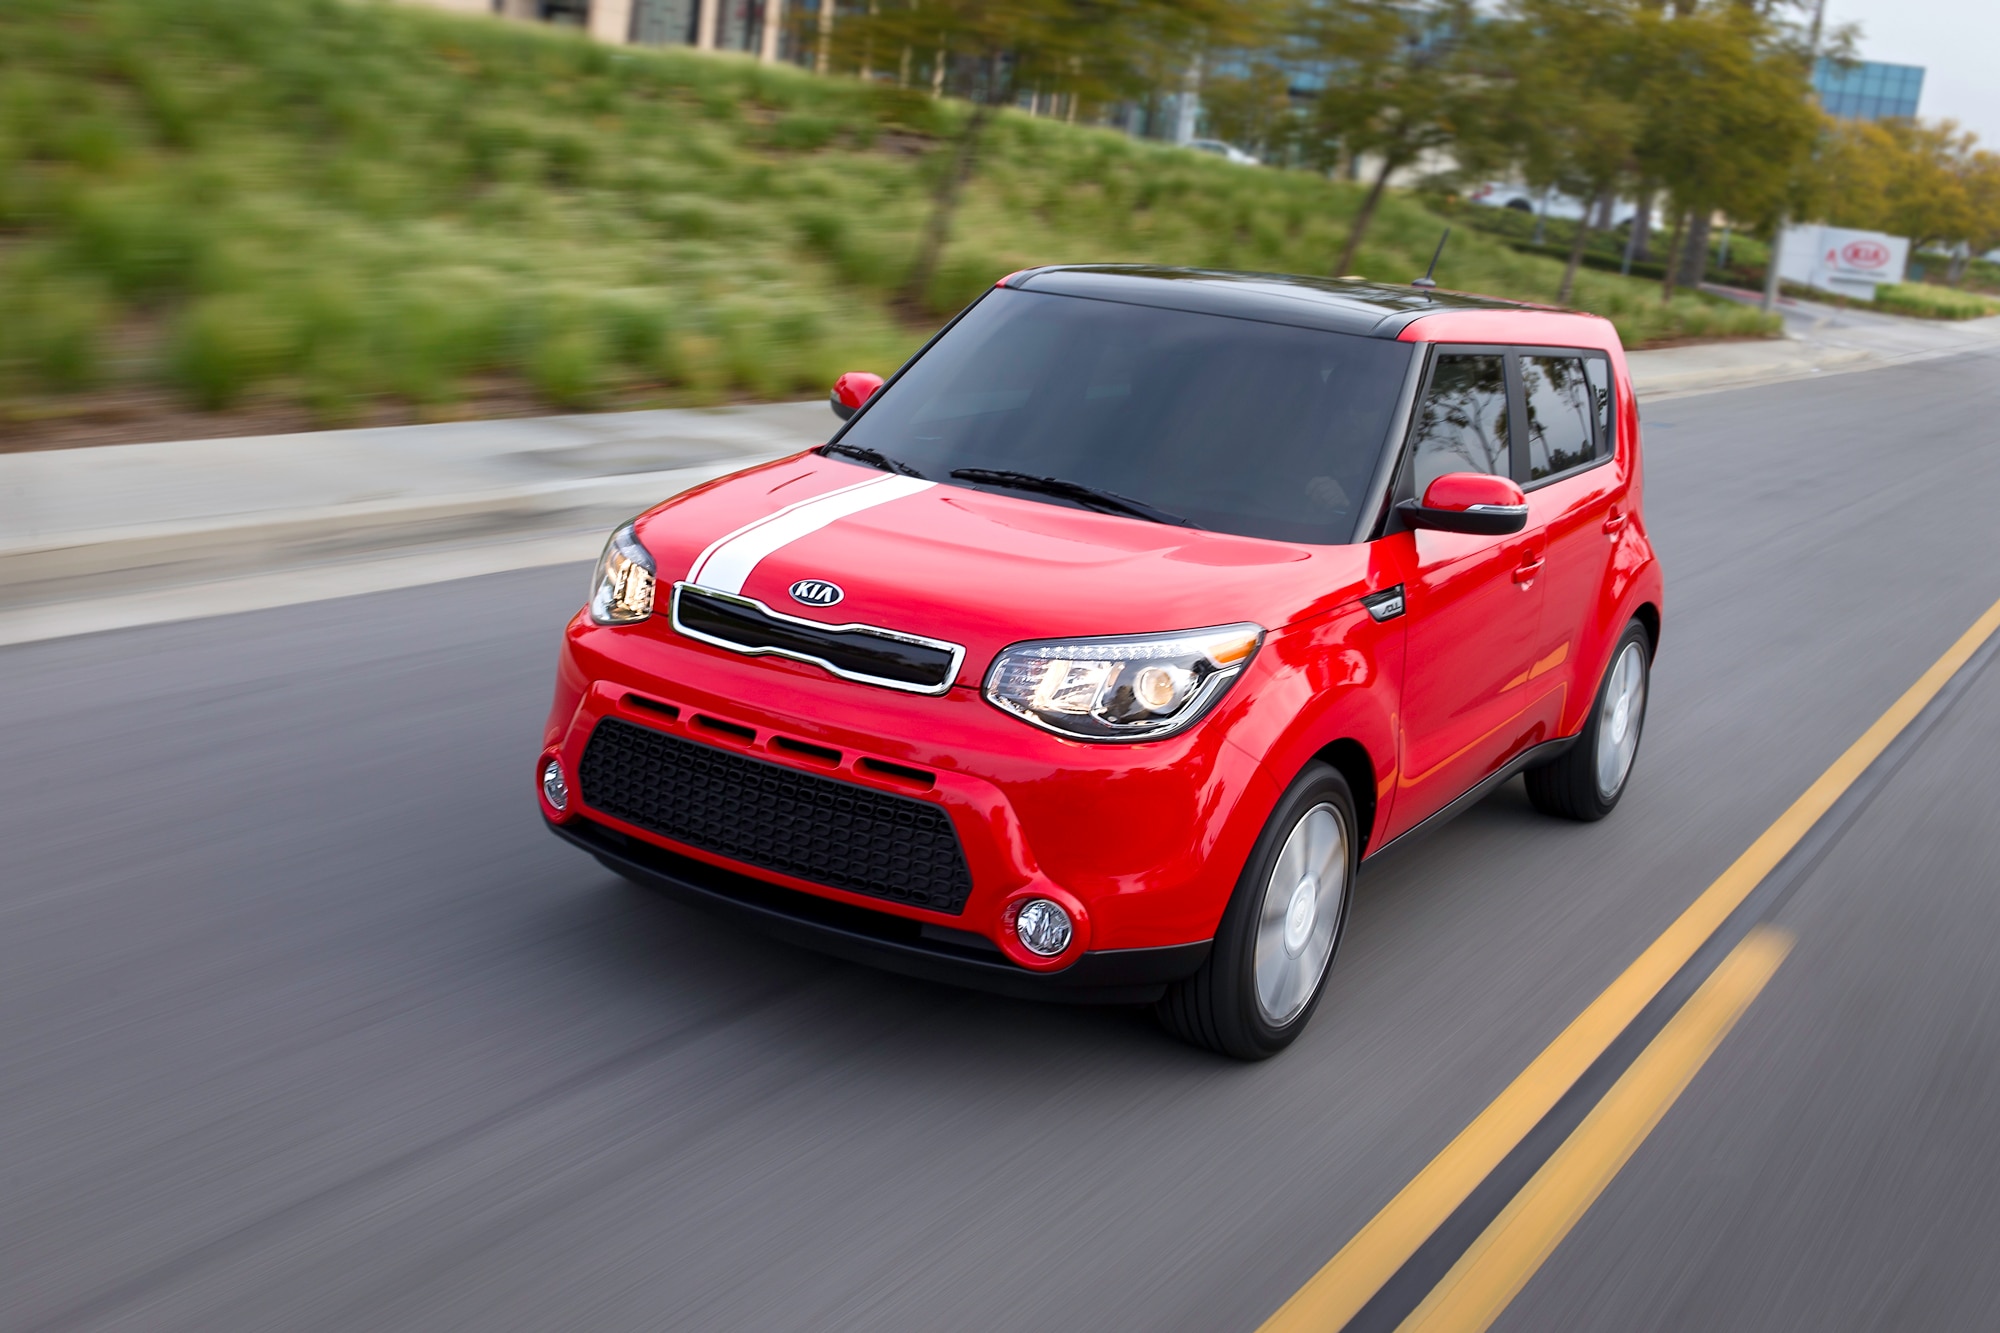 Red 2014 Kia Soul driving down highway